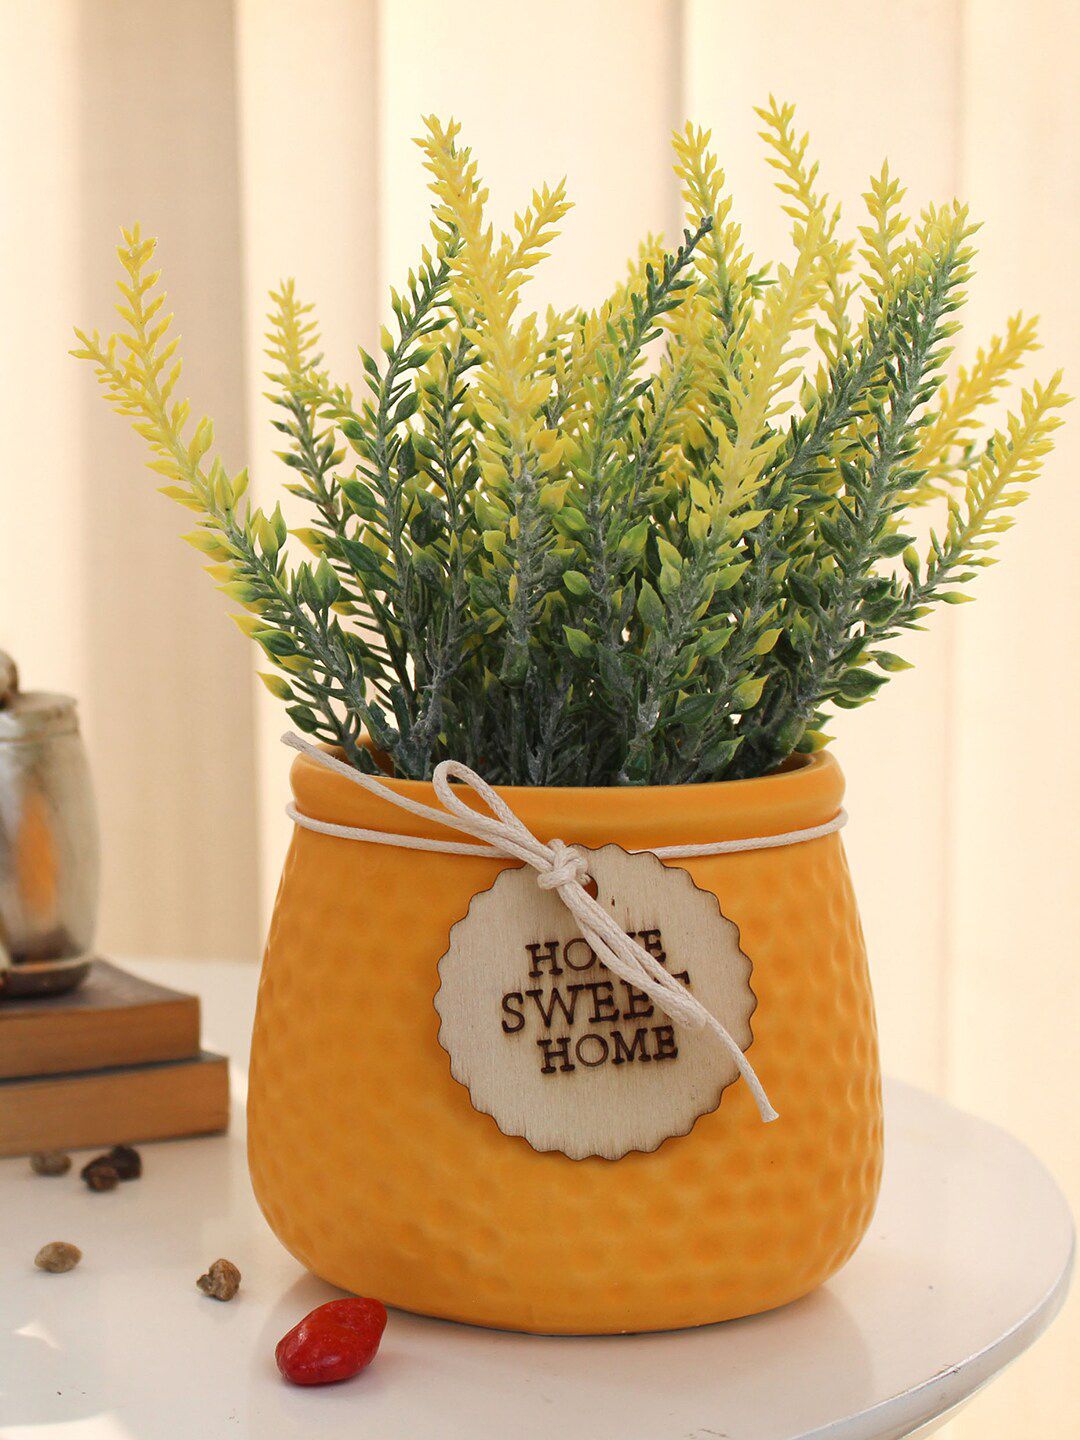 TIED RIBBONS Artificial Lavender Plant With Ceramic Pot Price in India